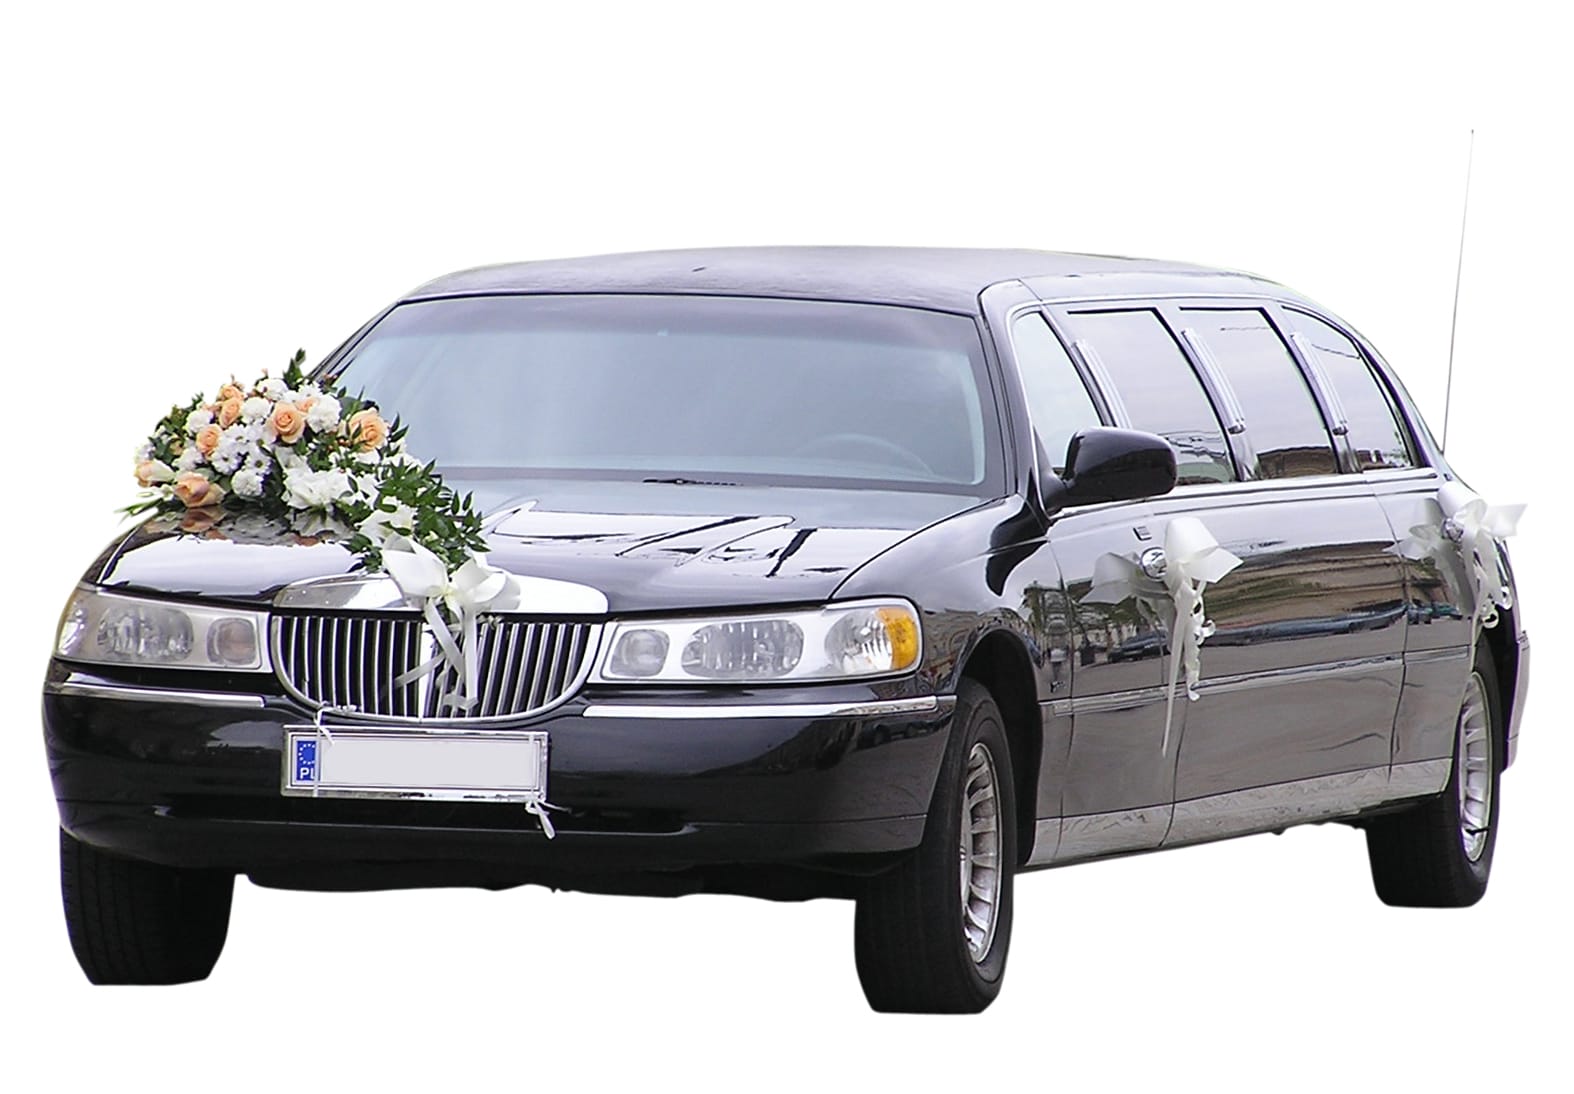 Tips for Decorating the Wedding Getaway Car